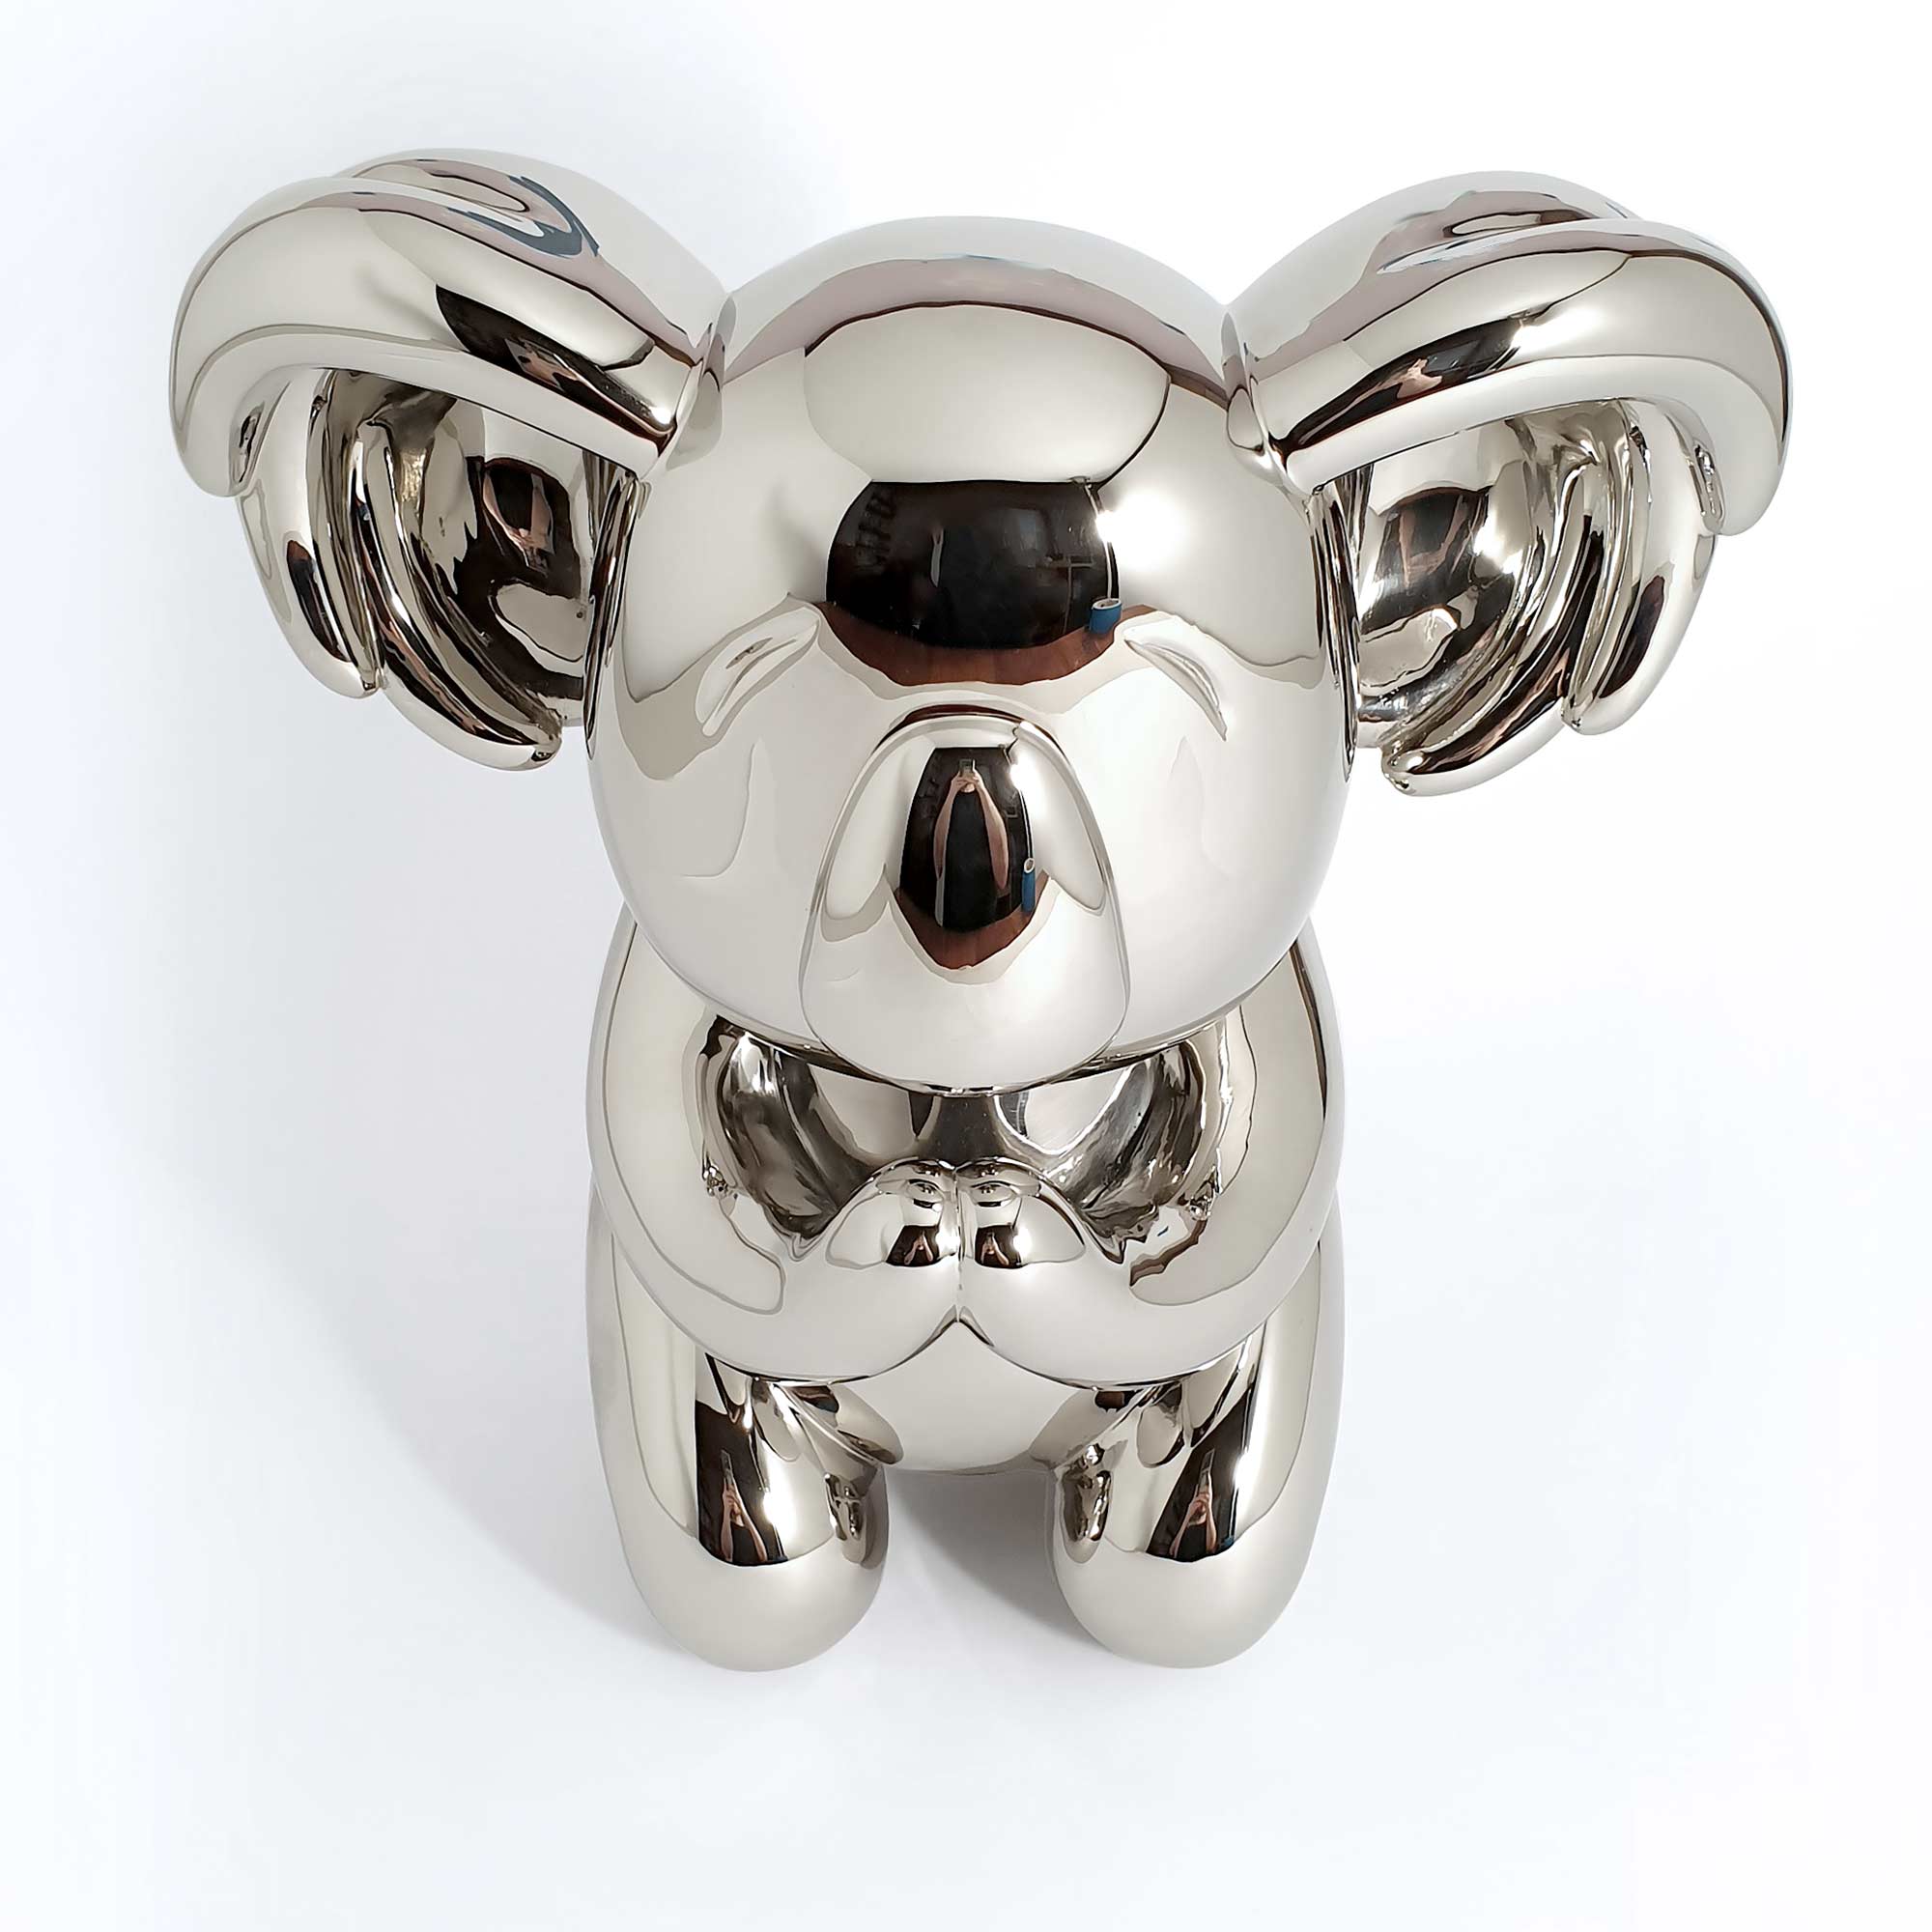 Koala “What else to do?” sculpture, Mirror Polished Stainless Steel Sculpture, by artist Ferdi B Dick, top view